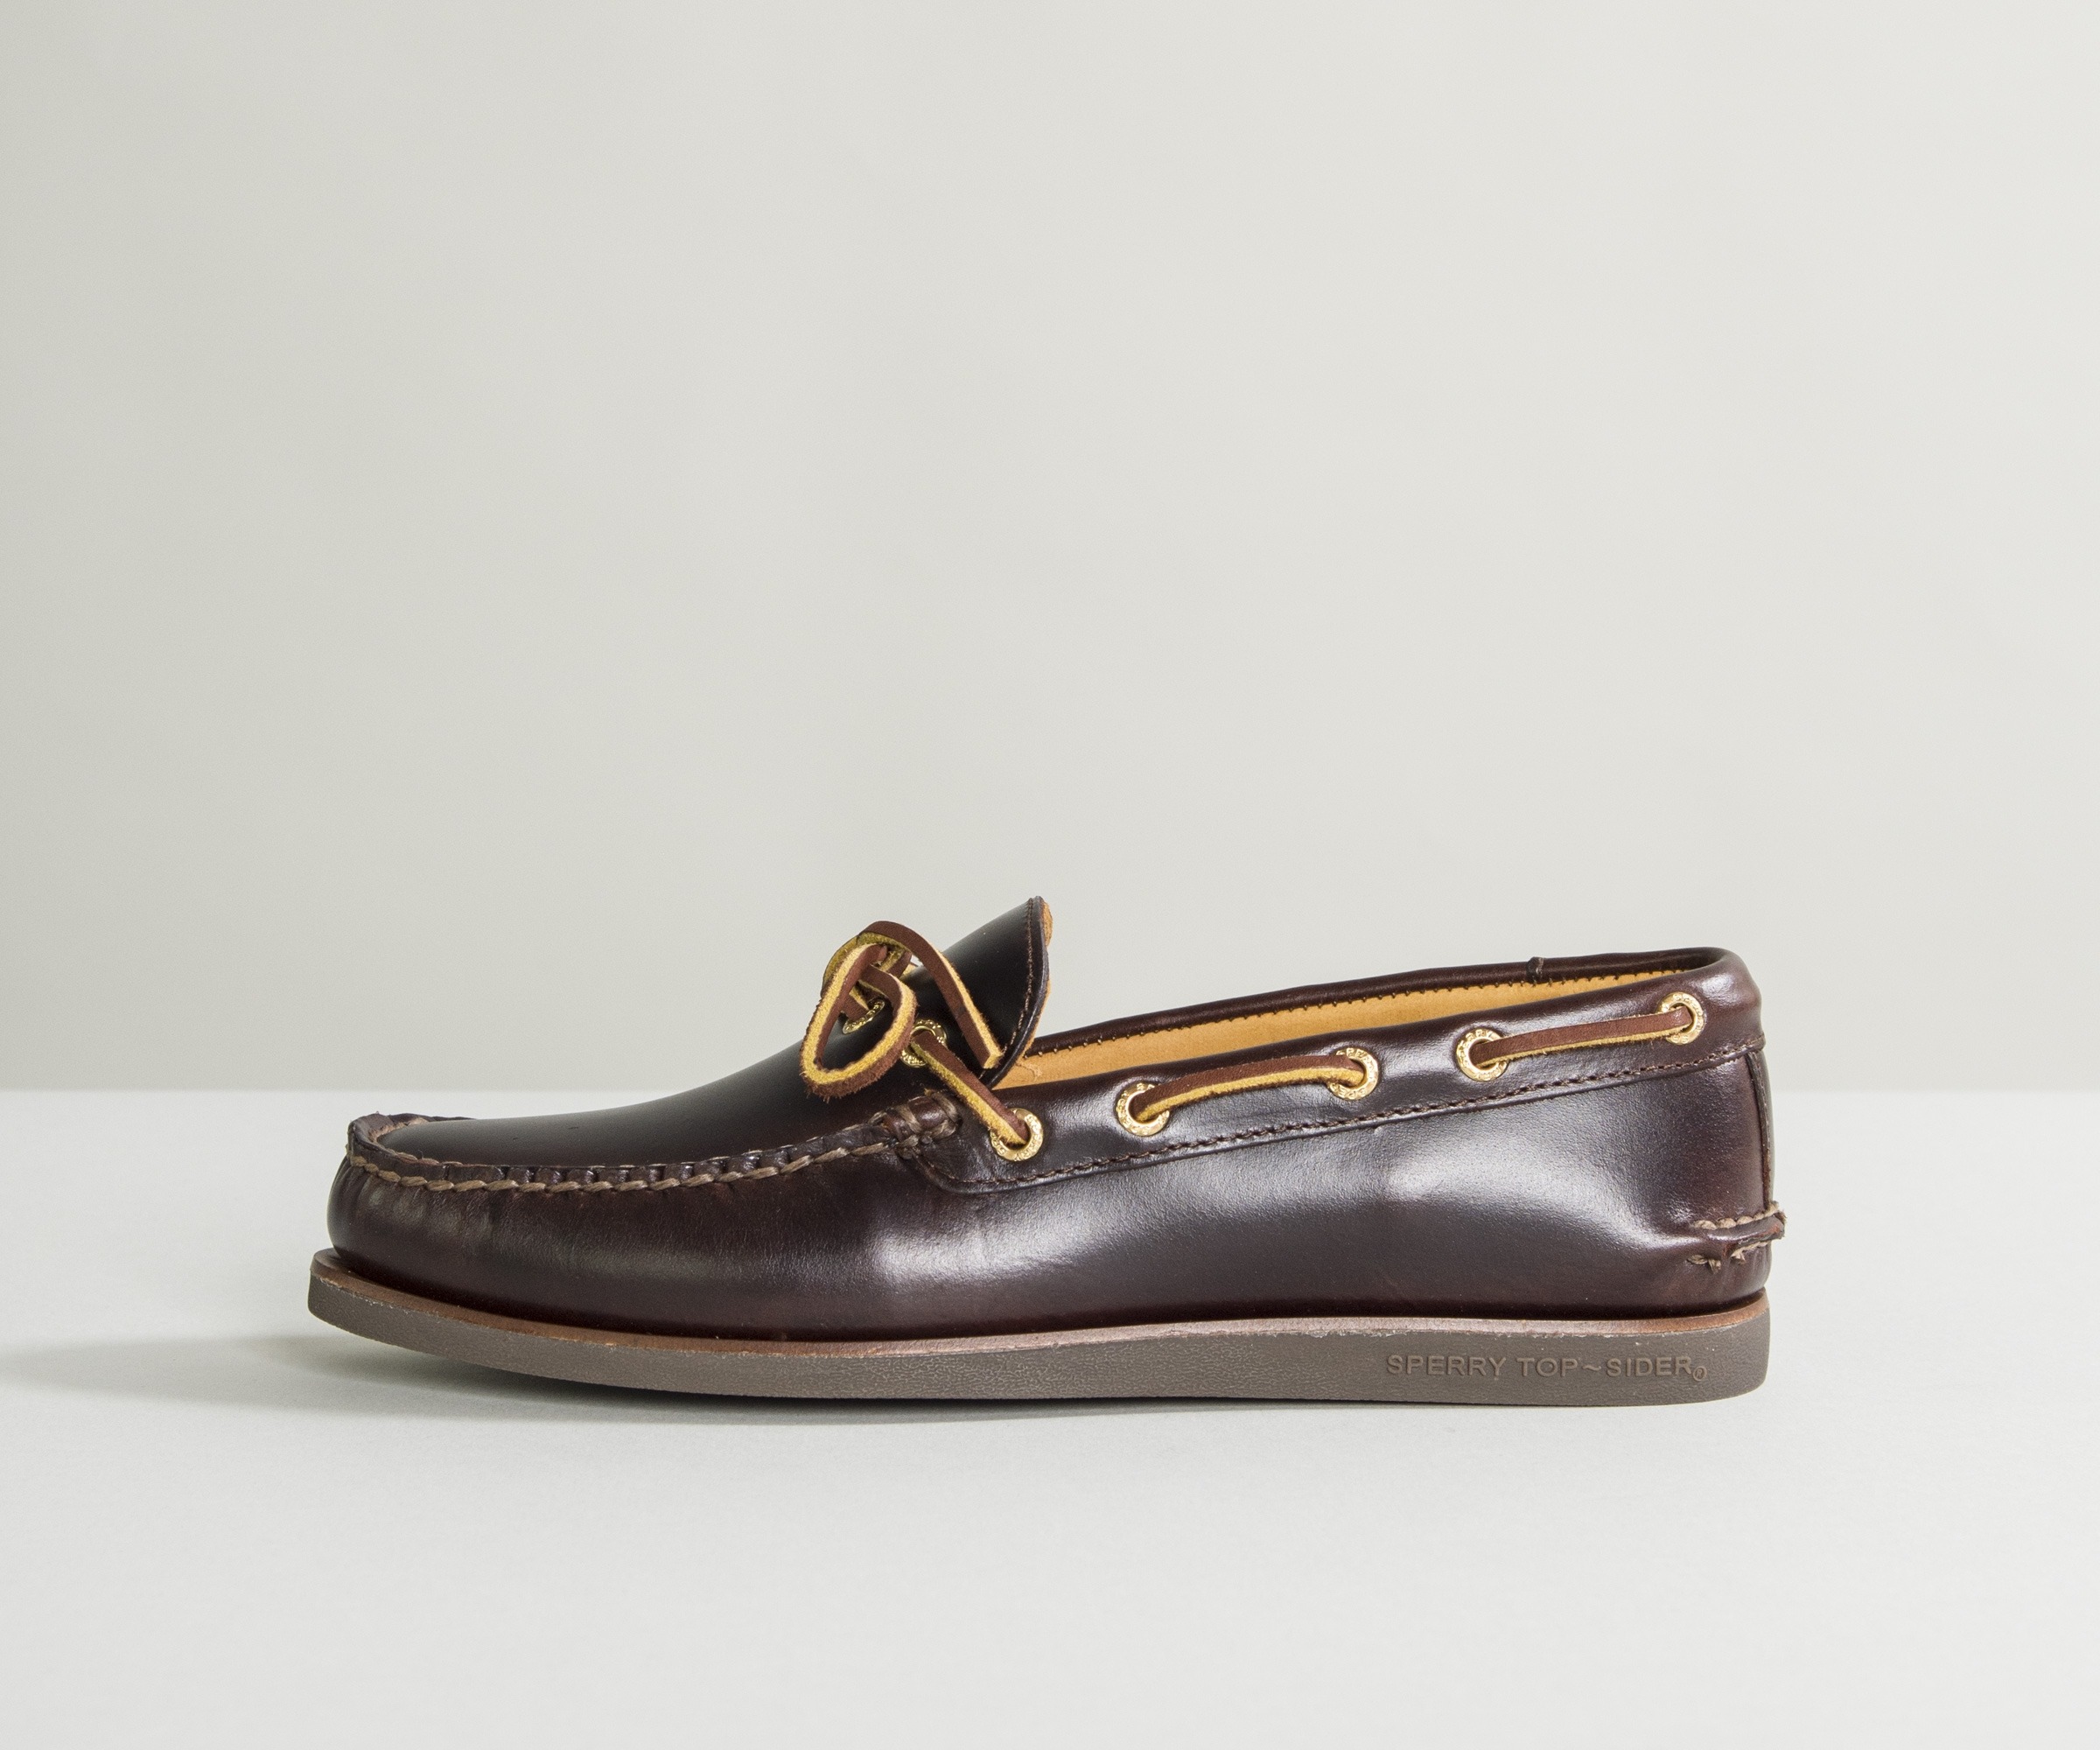 Sperry 'Top-Sider' Gold Cup Luxury Deck Shoes Amaretto